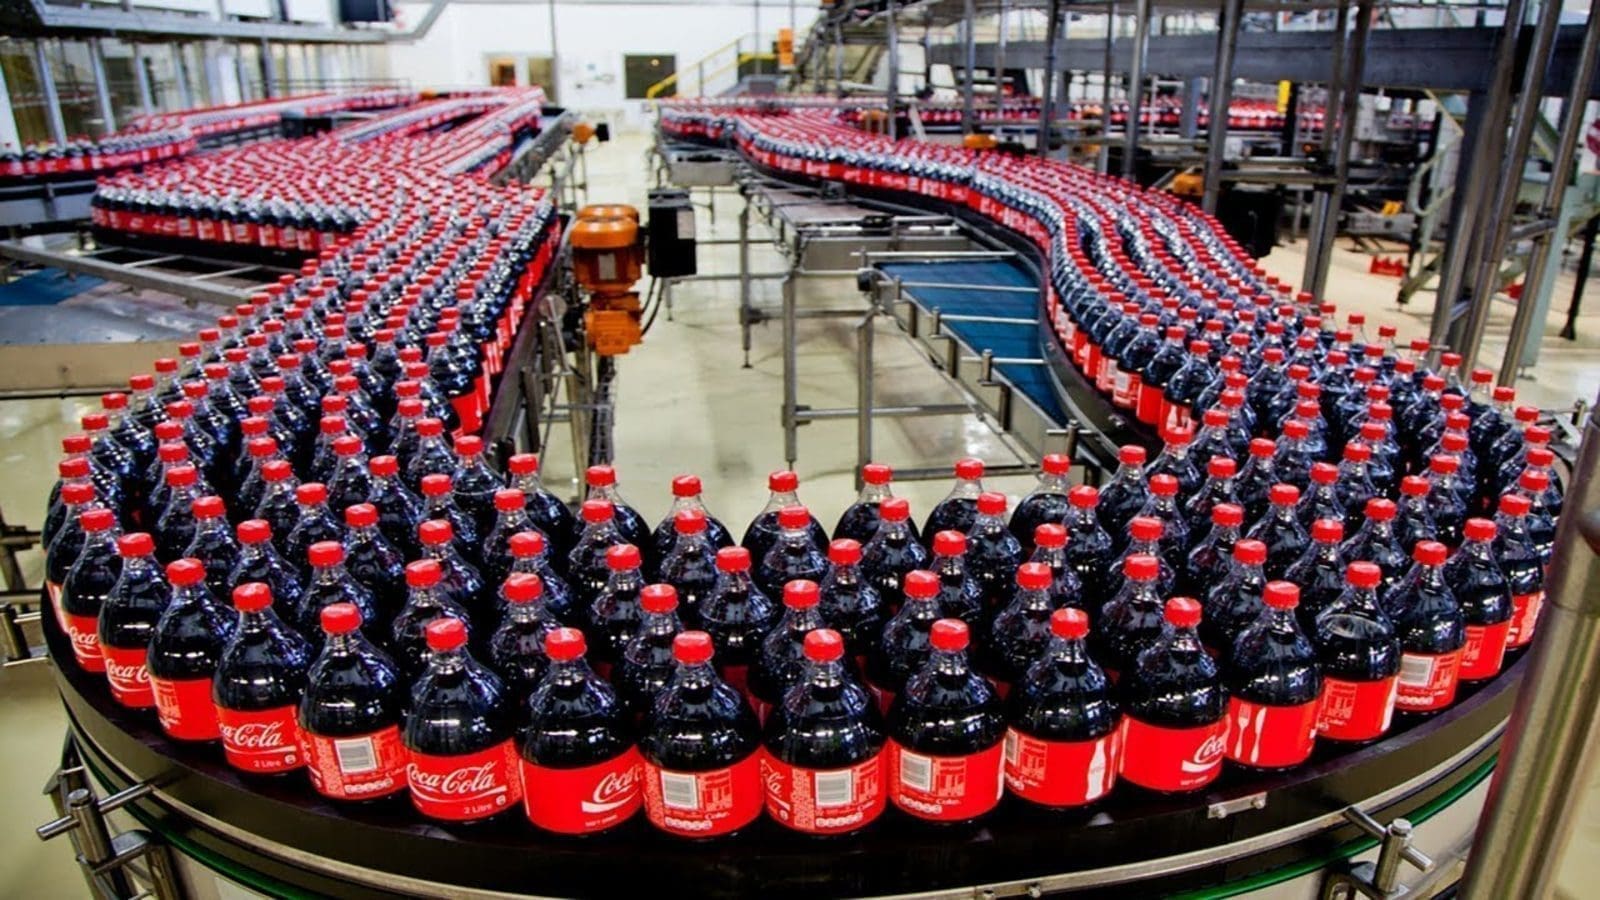 Coca-Cola sells 5% more products in Q1, launches “Create Real Magic” platform for consumers